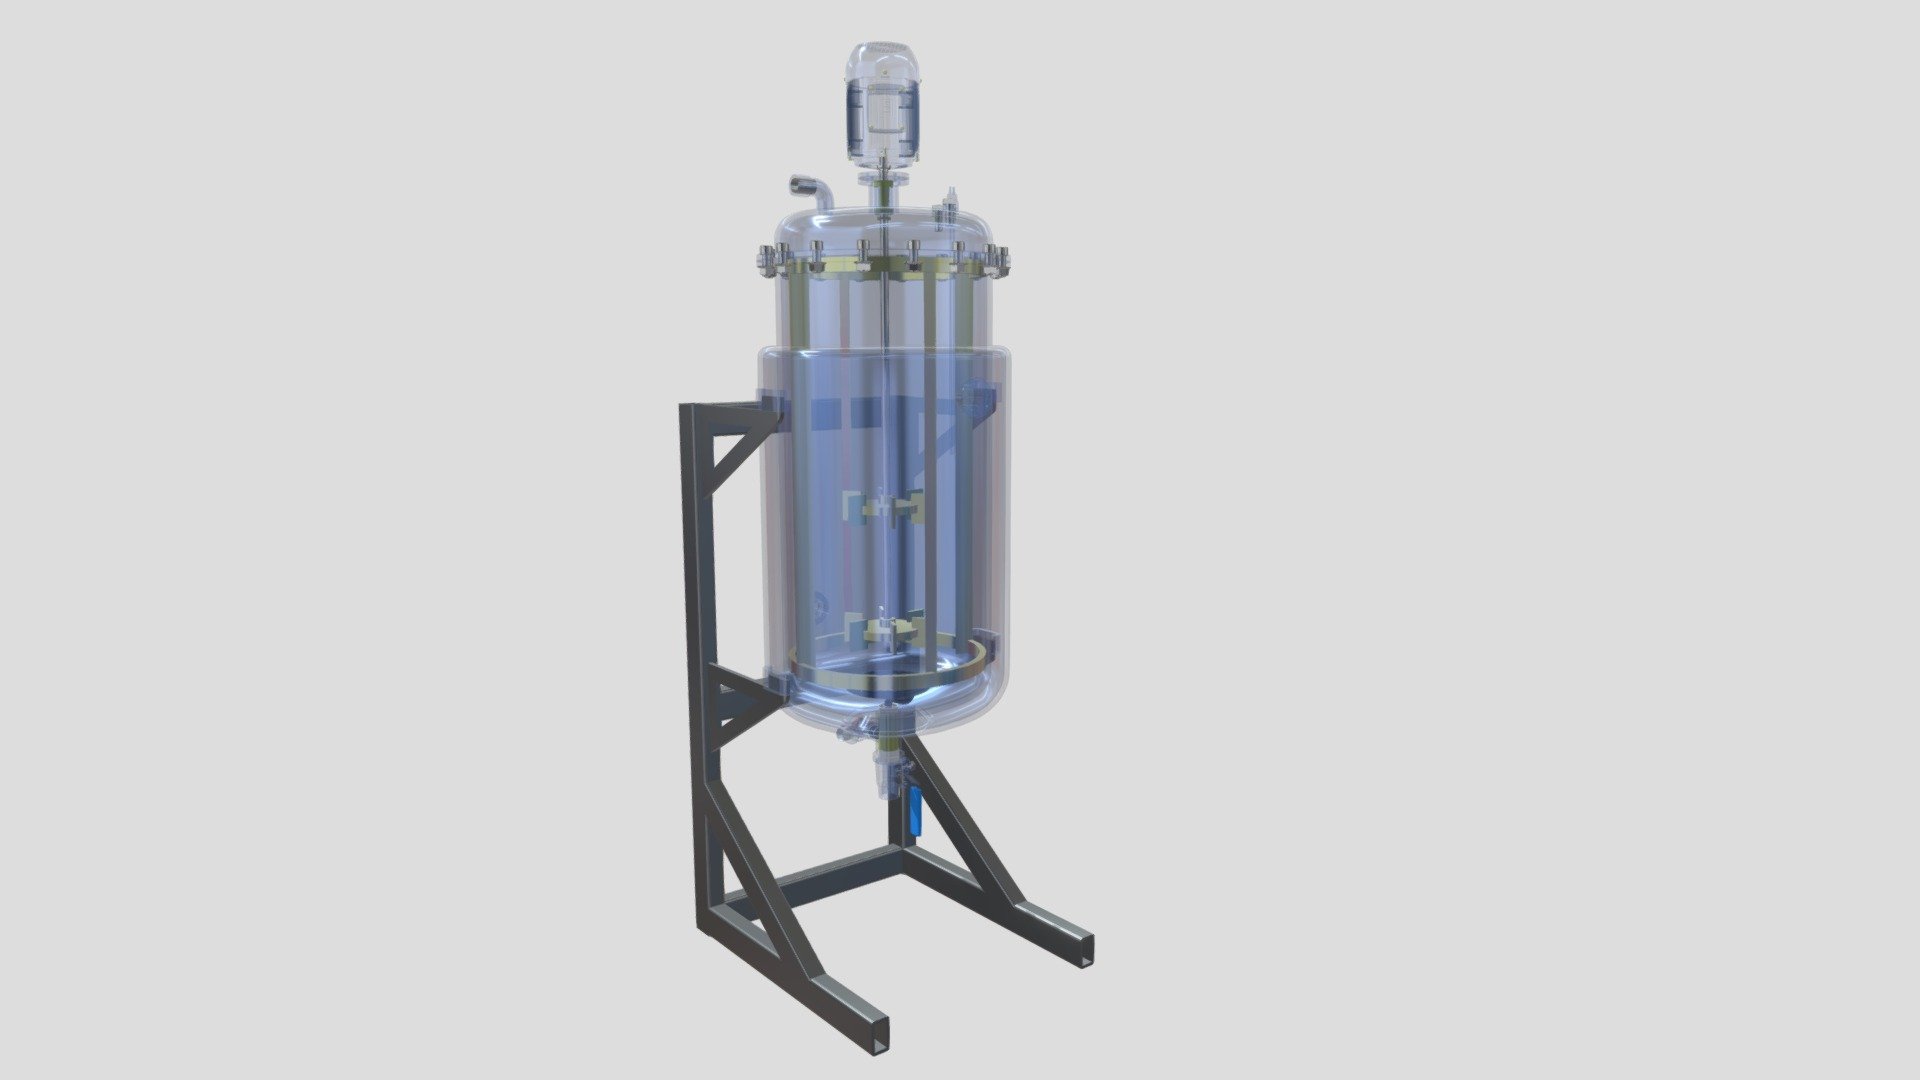 A bioreactor is a type of fermentation vessel used to produce chemicals and biological reactions. It is a closed container with adequate aeration, agitation, temperature, and pH control, as well as a drain or overflow vent to remove the waste biomass and products of cultured microorganisms 3d model